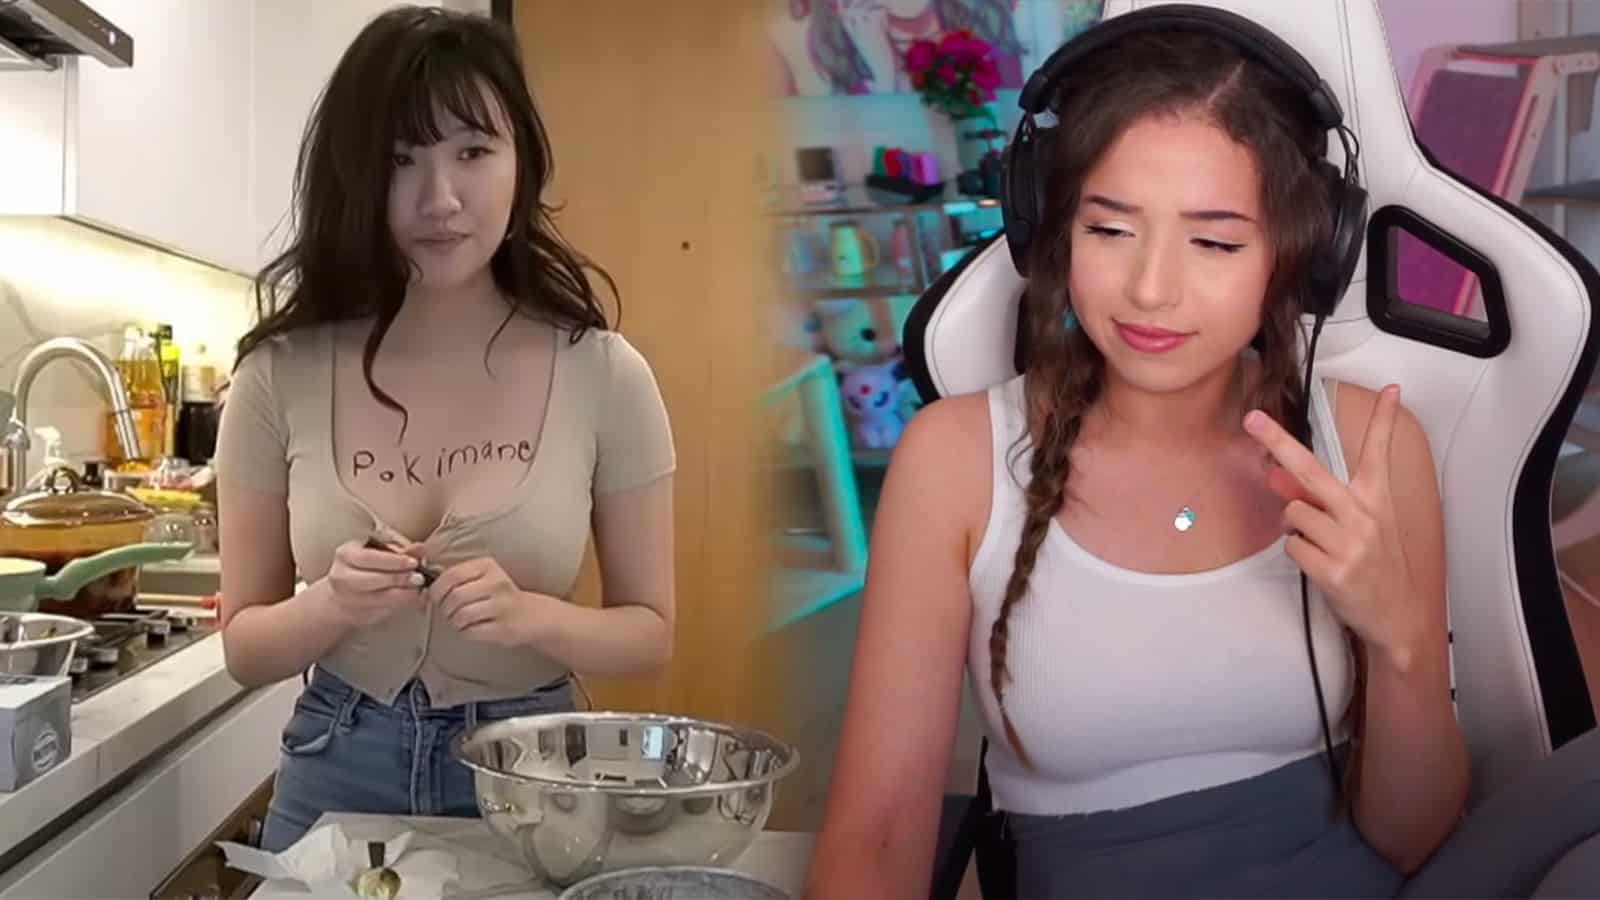 Pokimane 1000 gifted subs